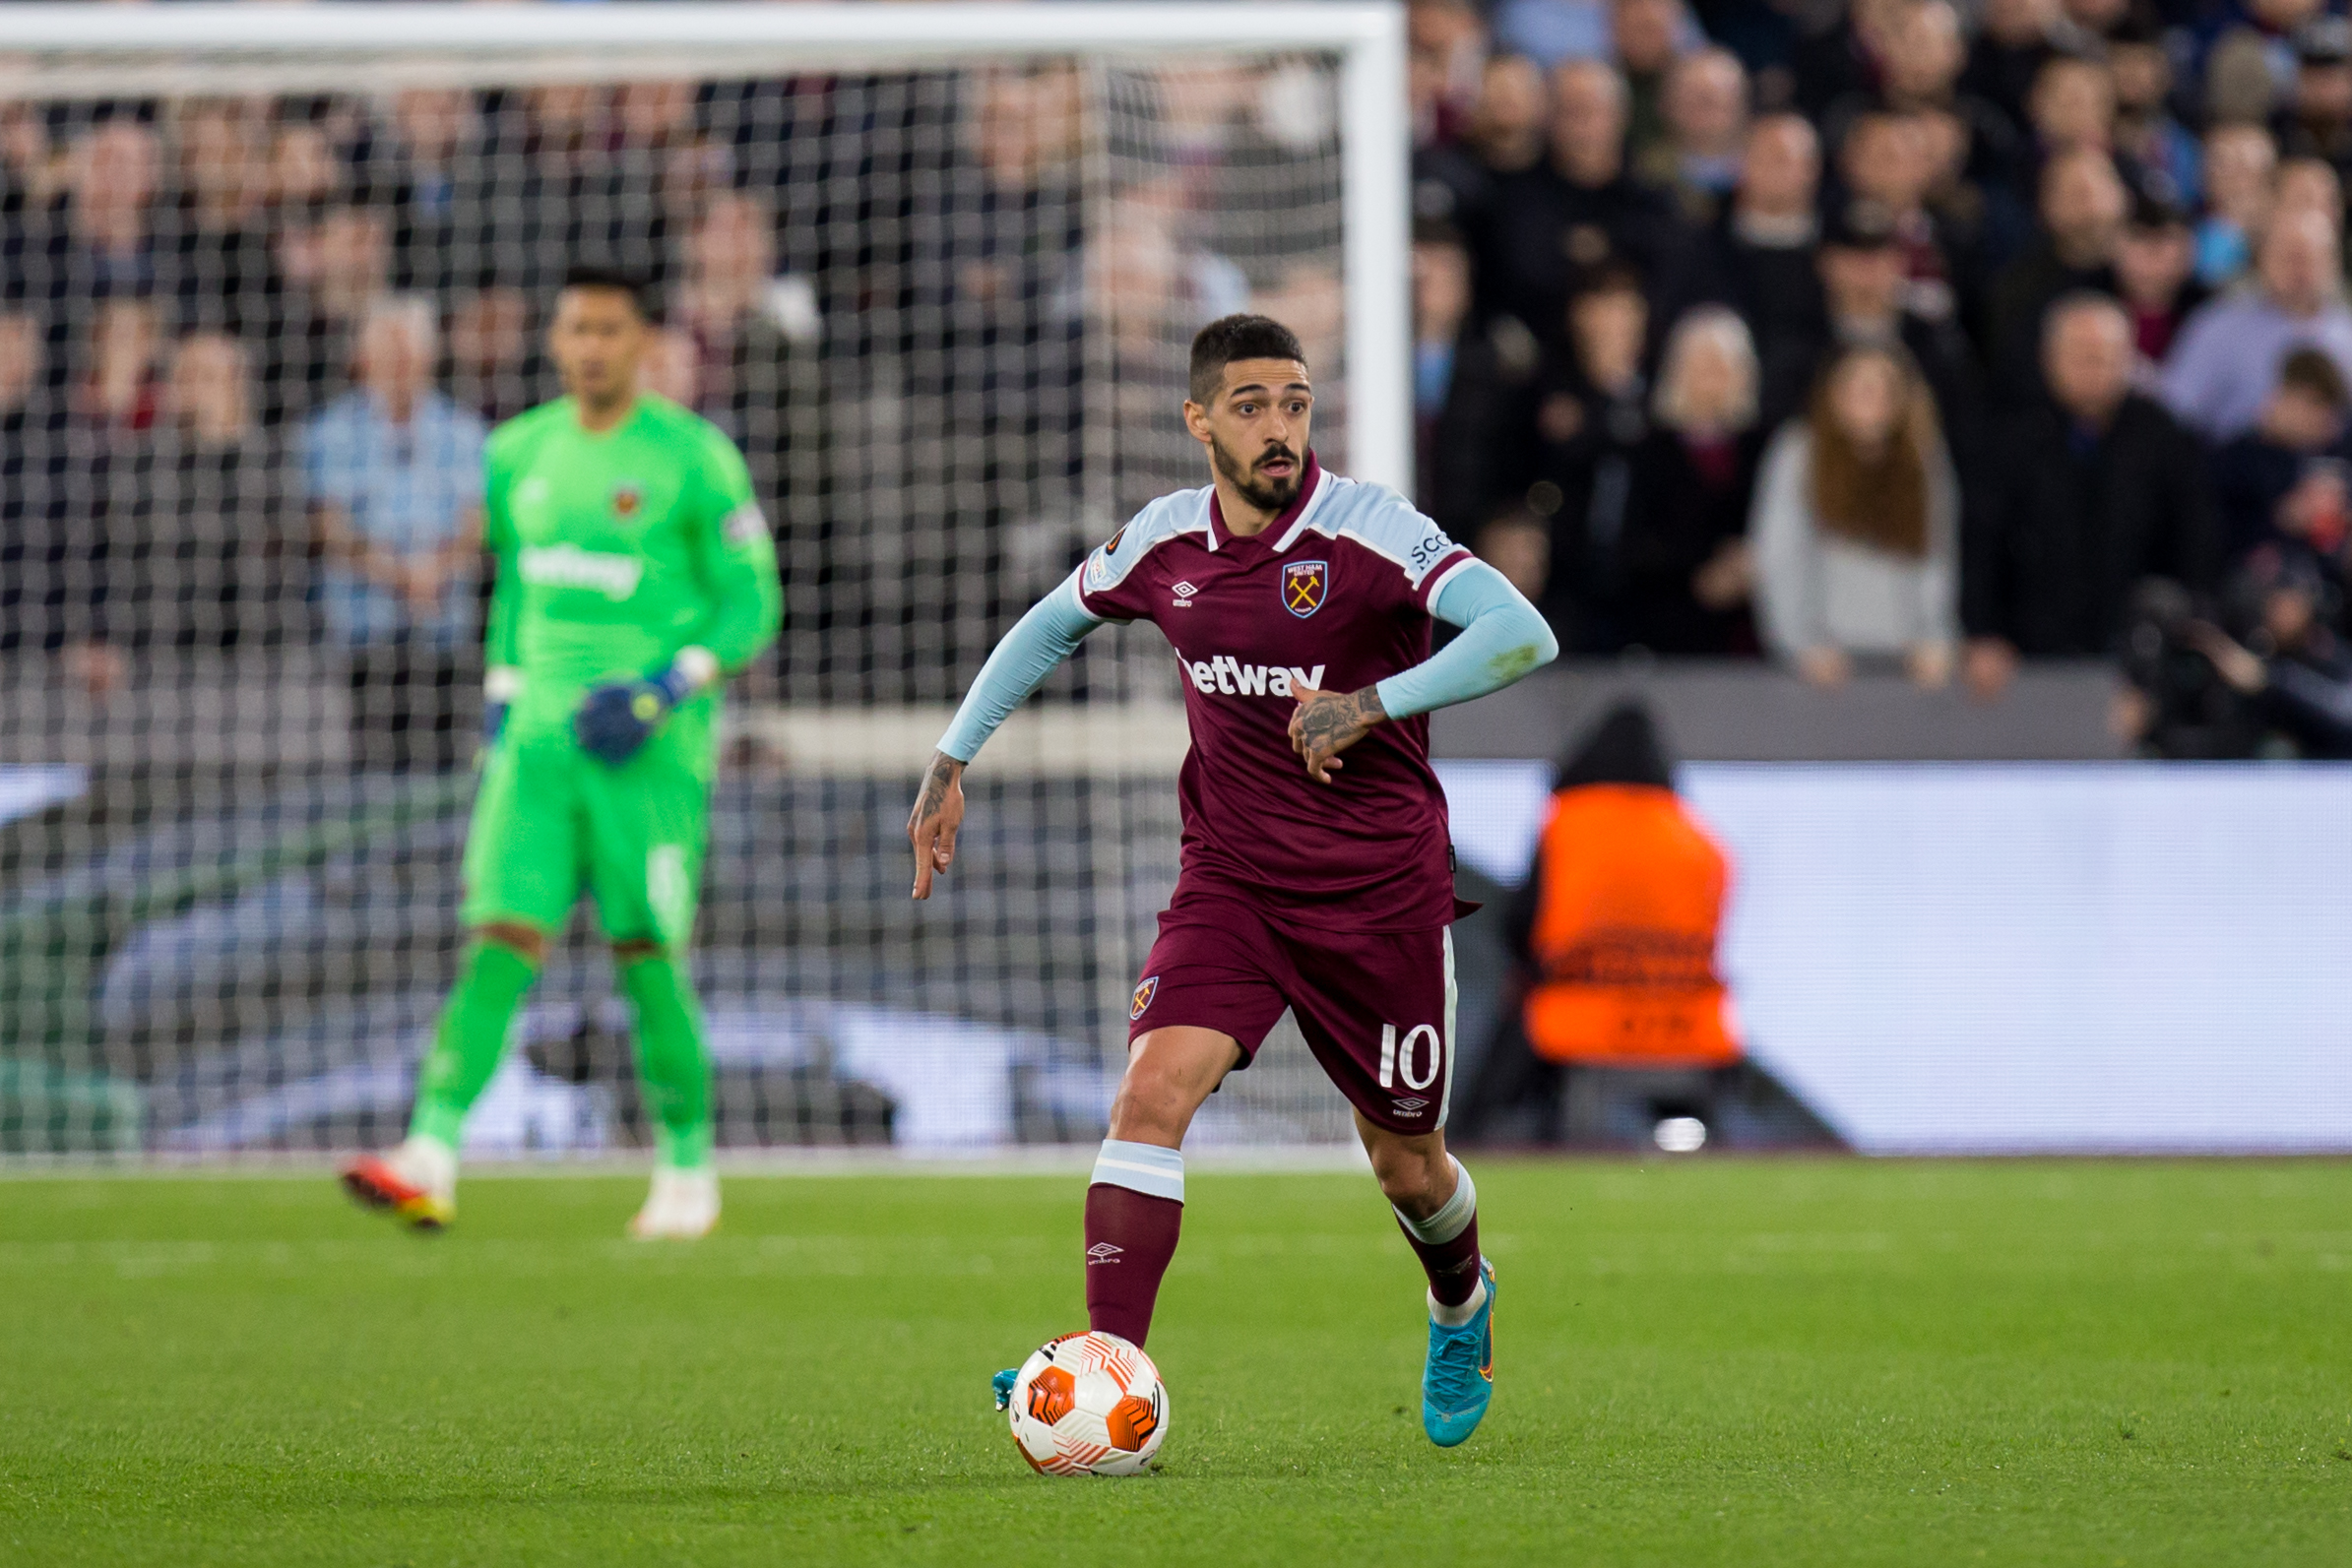 West Ham United's reliance on Manuel Lanzini is actually hugely concerning